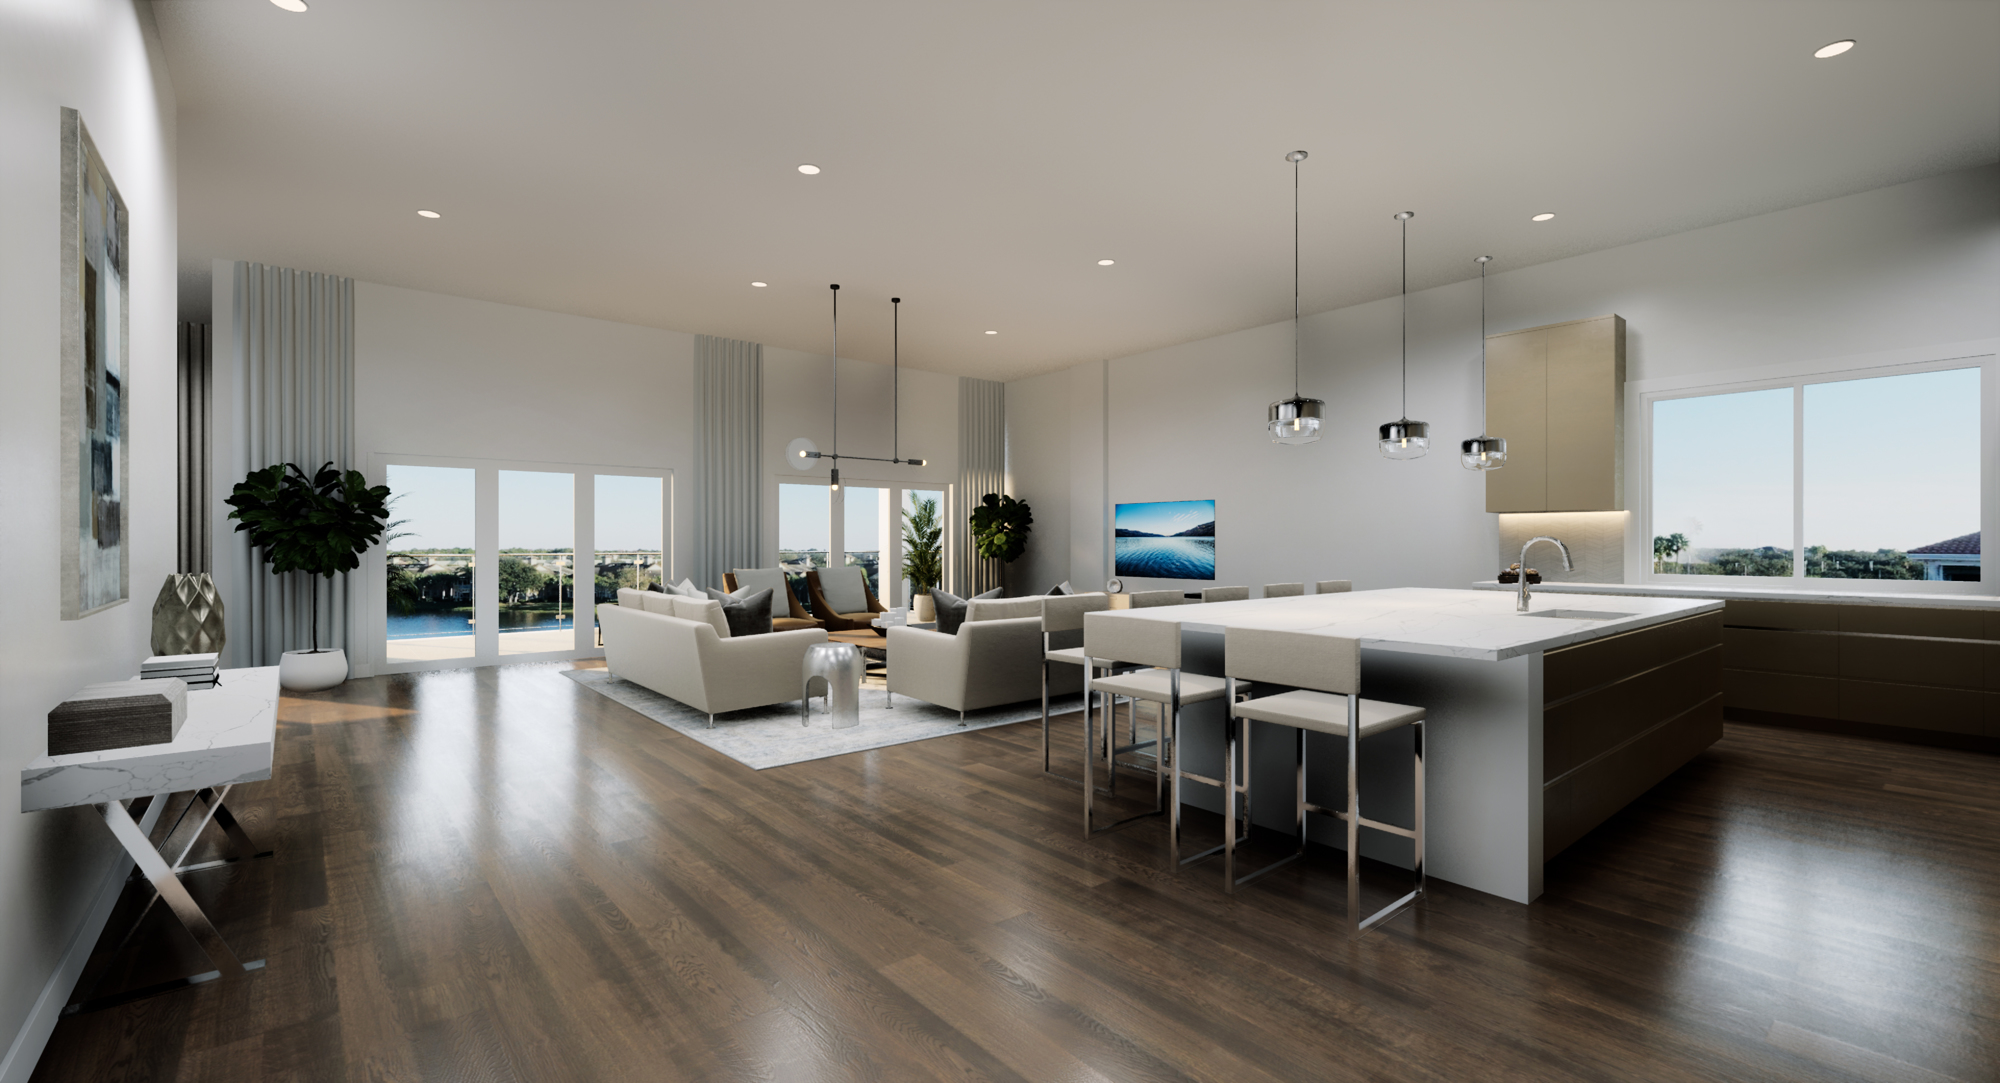 Adam Myara said units would include high-end features such as luxury vinyl plank floors, and granite and quartz countertops. (Courtesy rendering)